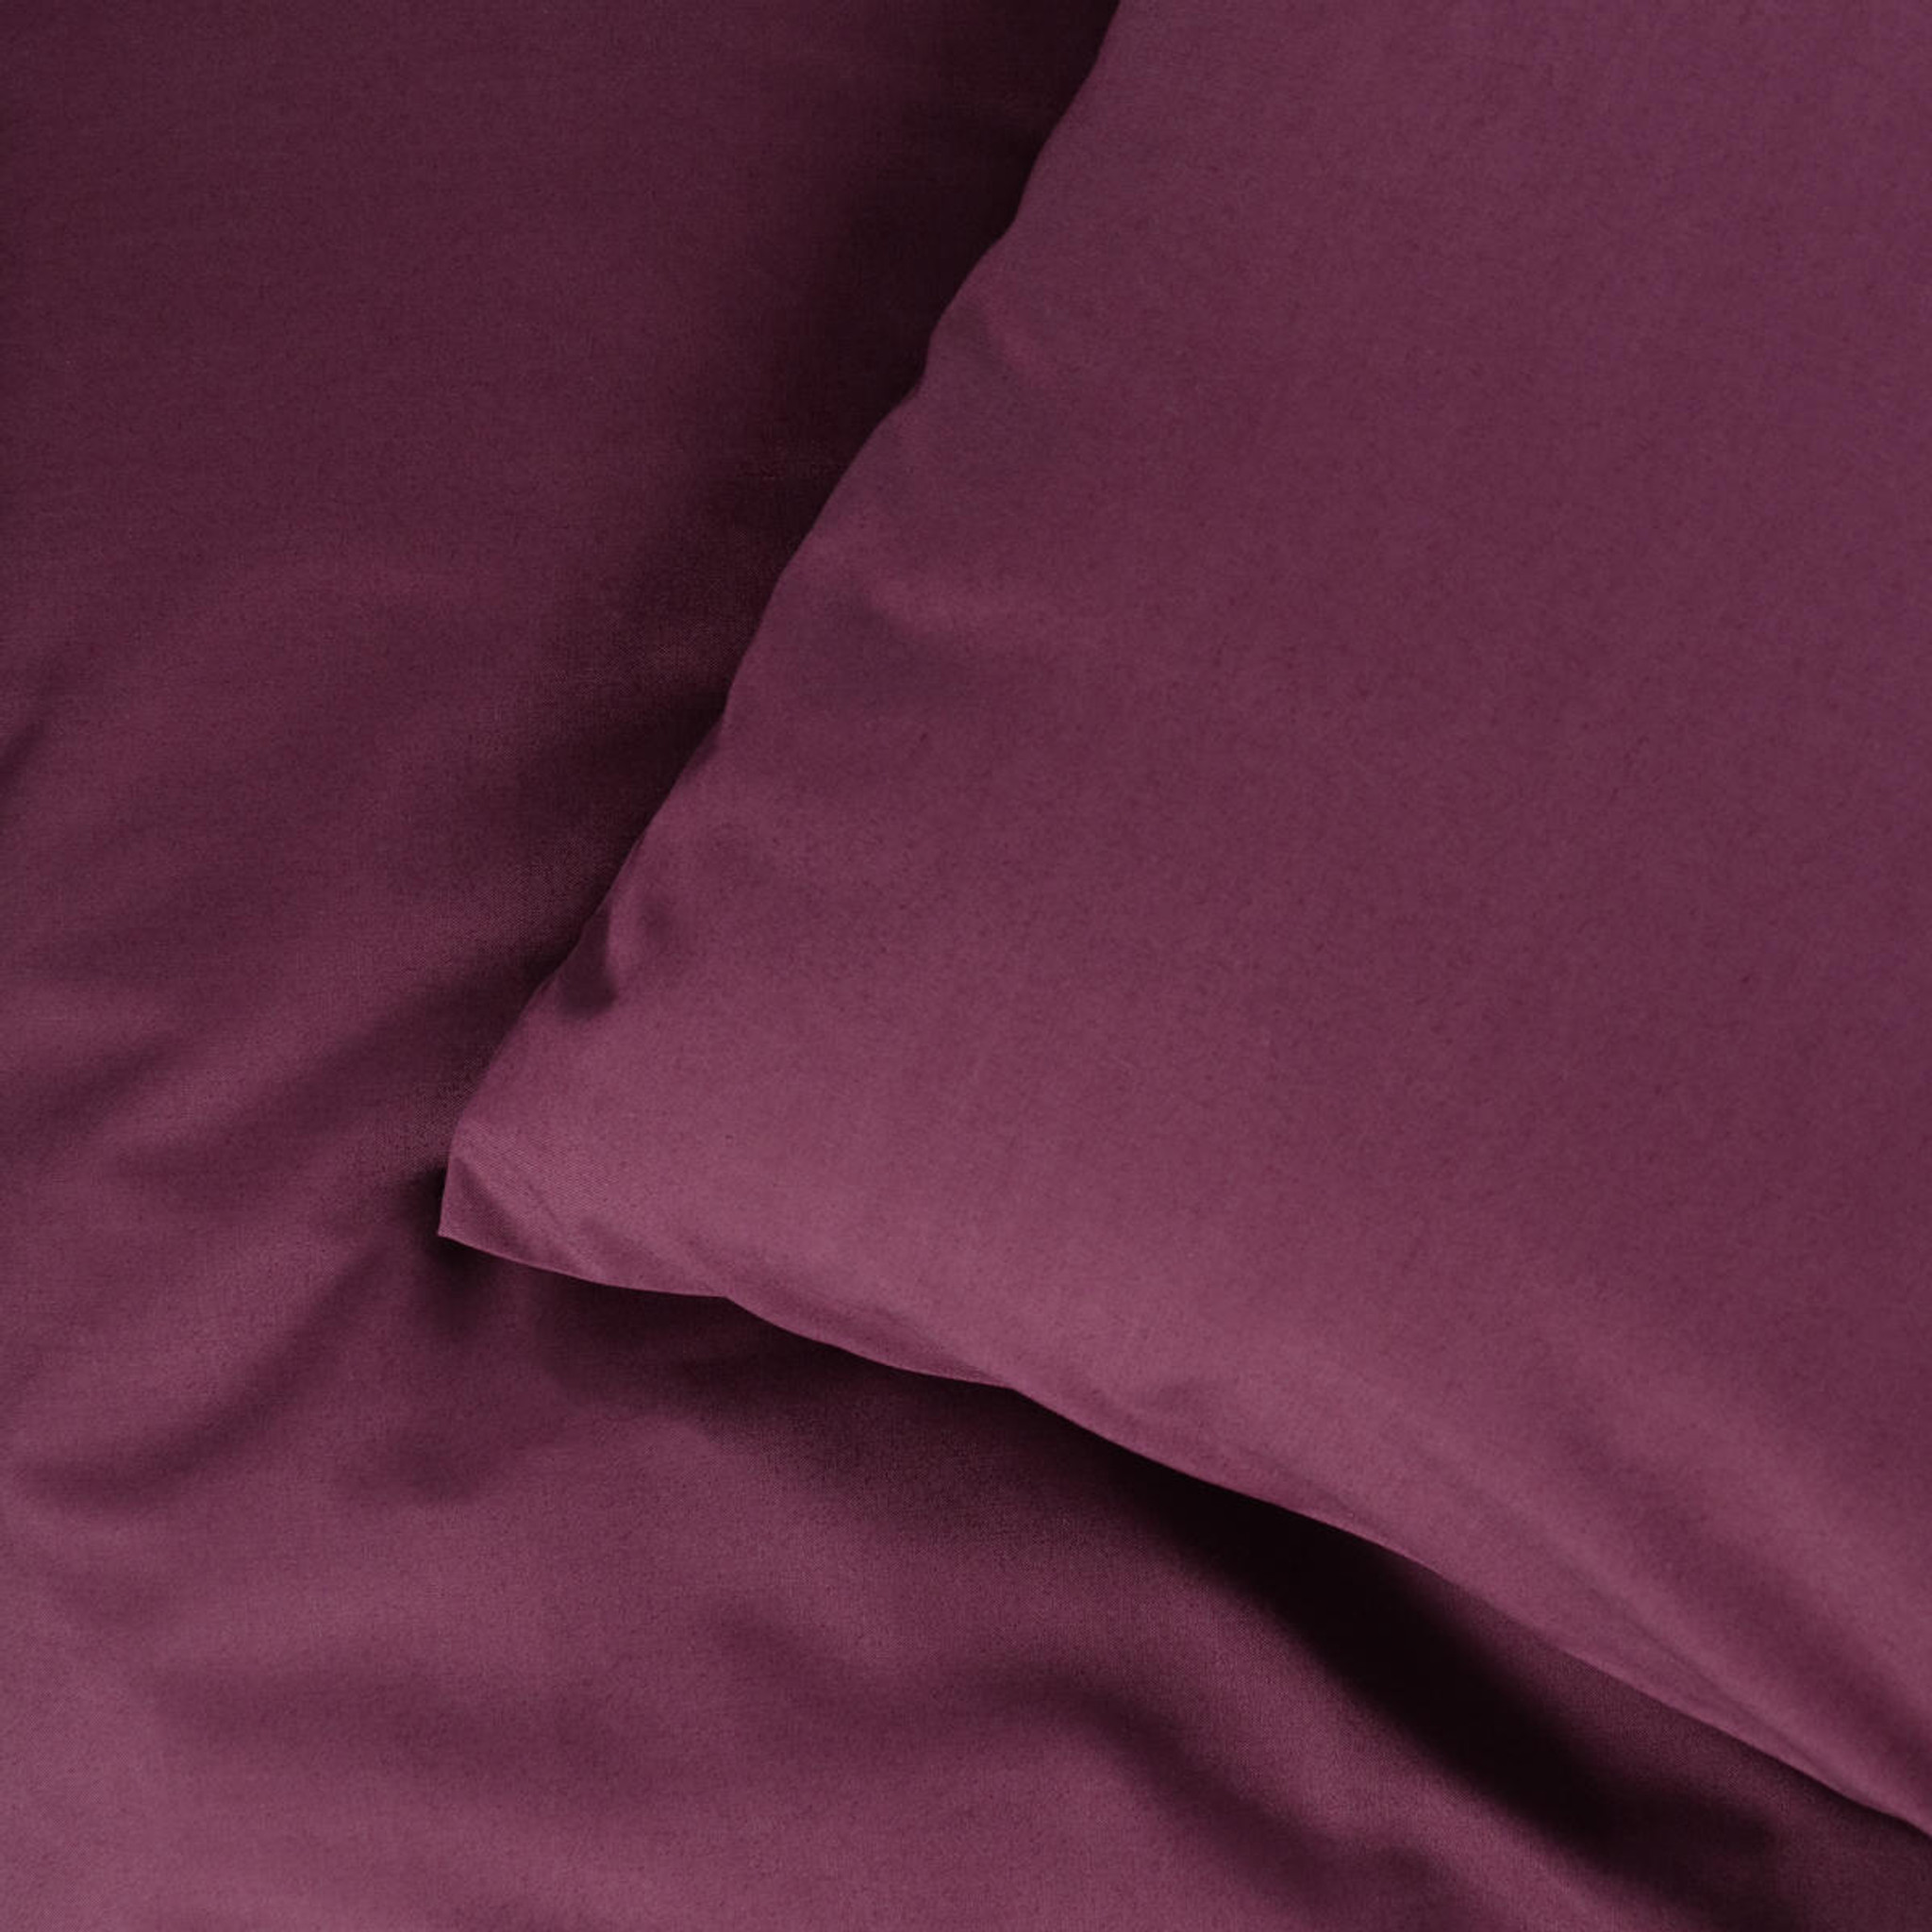 Low Cost Flame Retardent Pillowcases BS7175 With Price Promise Guarantee